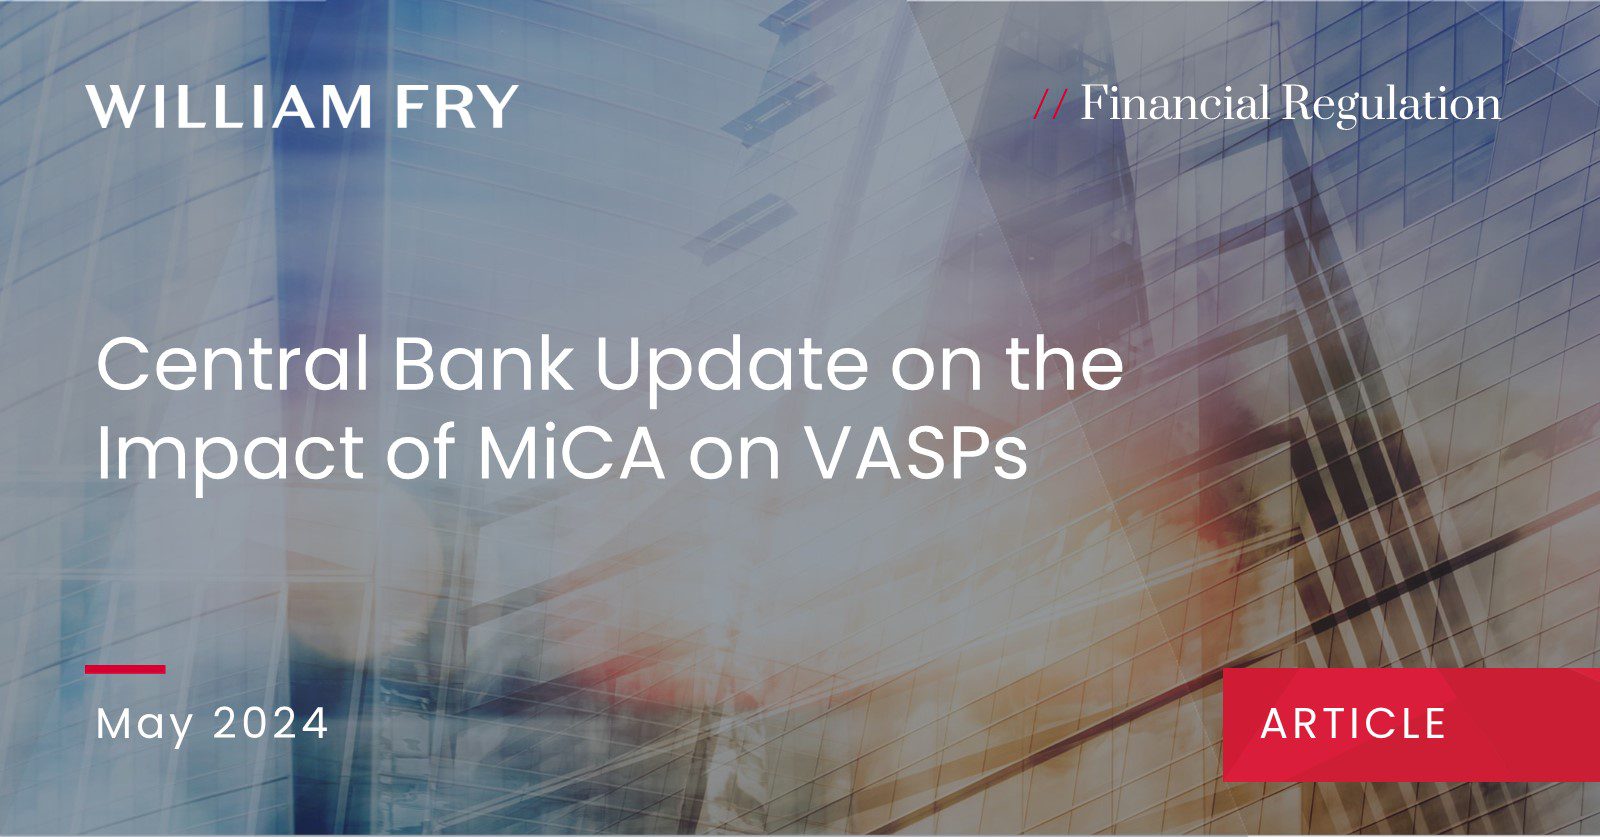 Central Bank Update on the impact of MiCA on VASPs